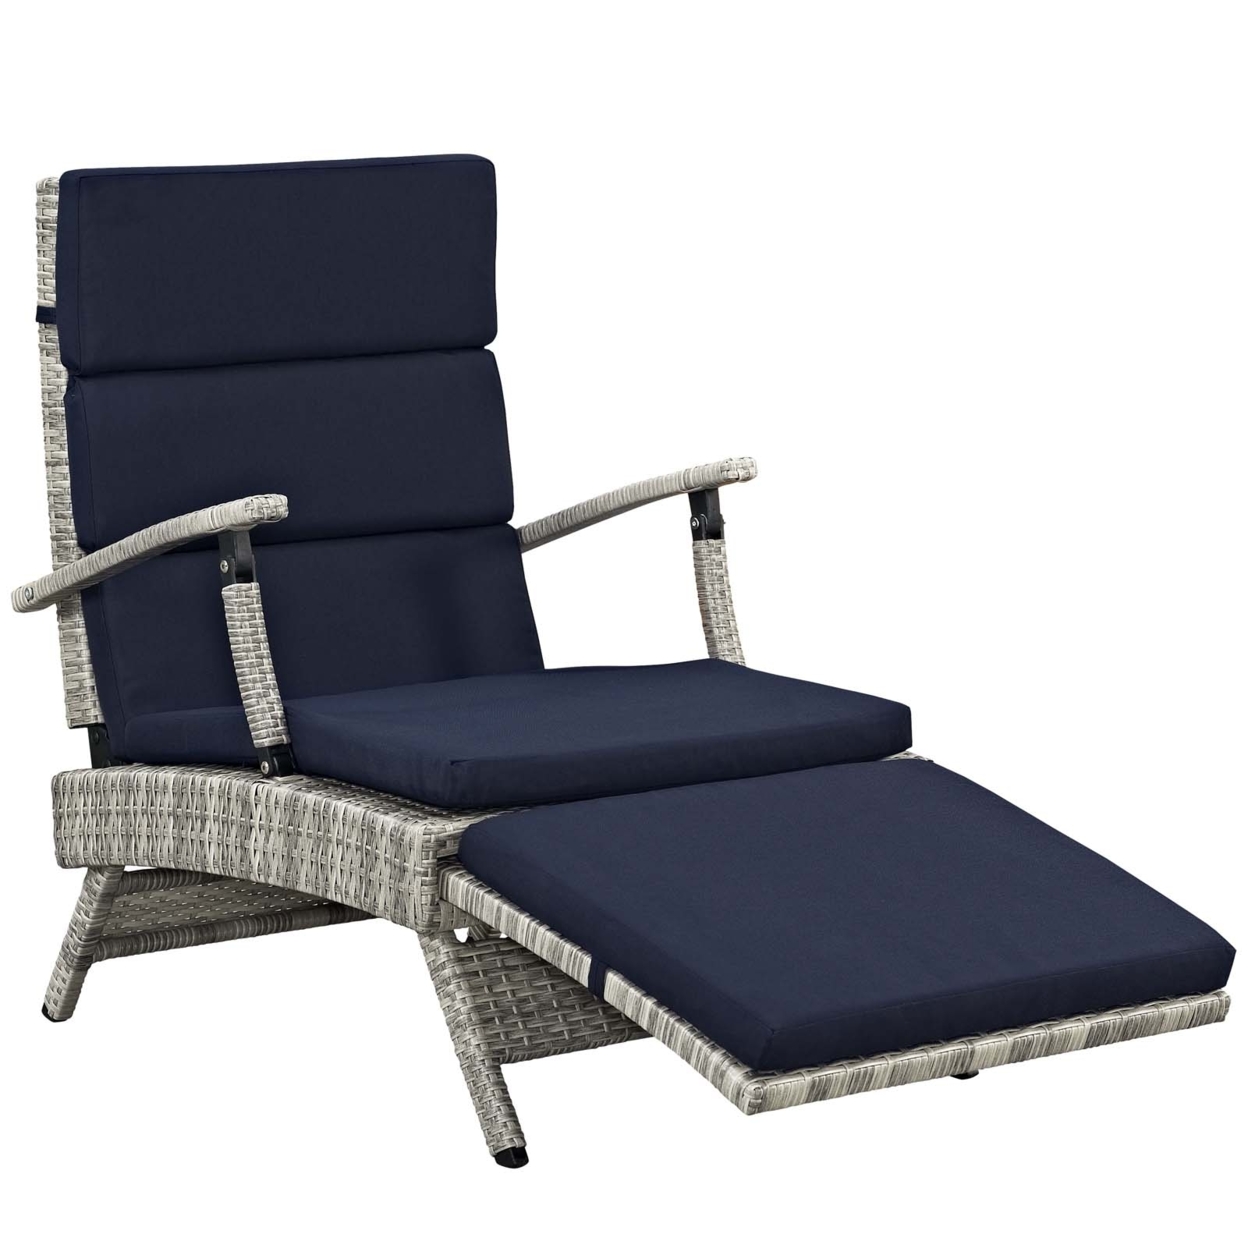 Envisage Chaise Outdoor Patio Wicker Rattan Lounge Chair,Light Gray Navy